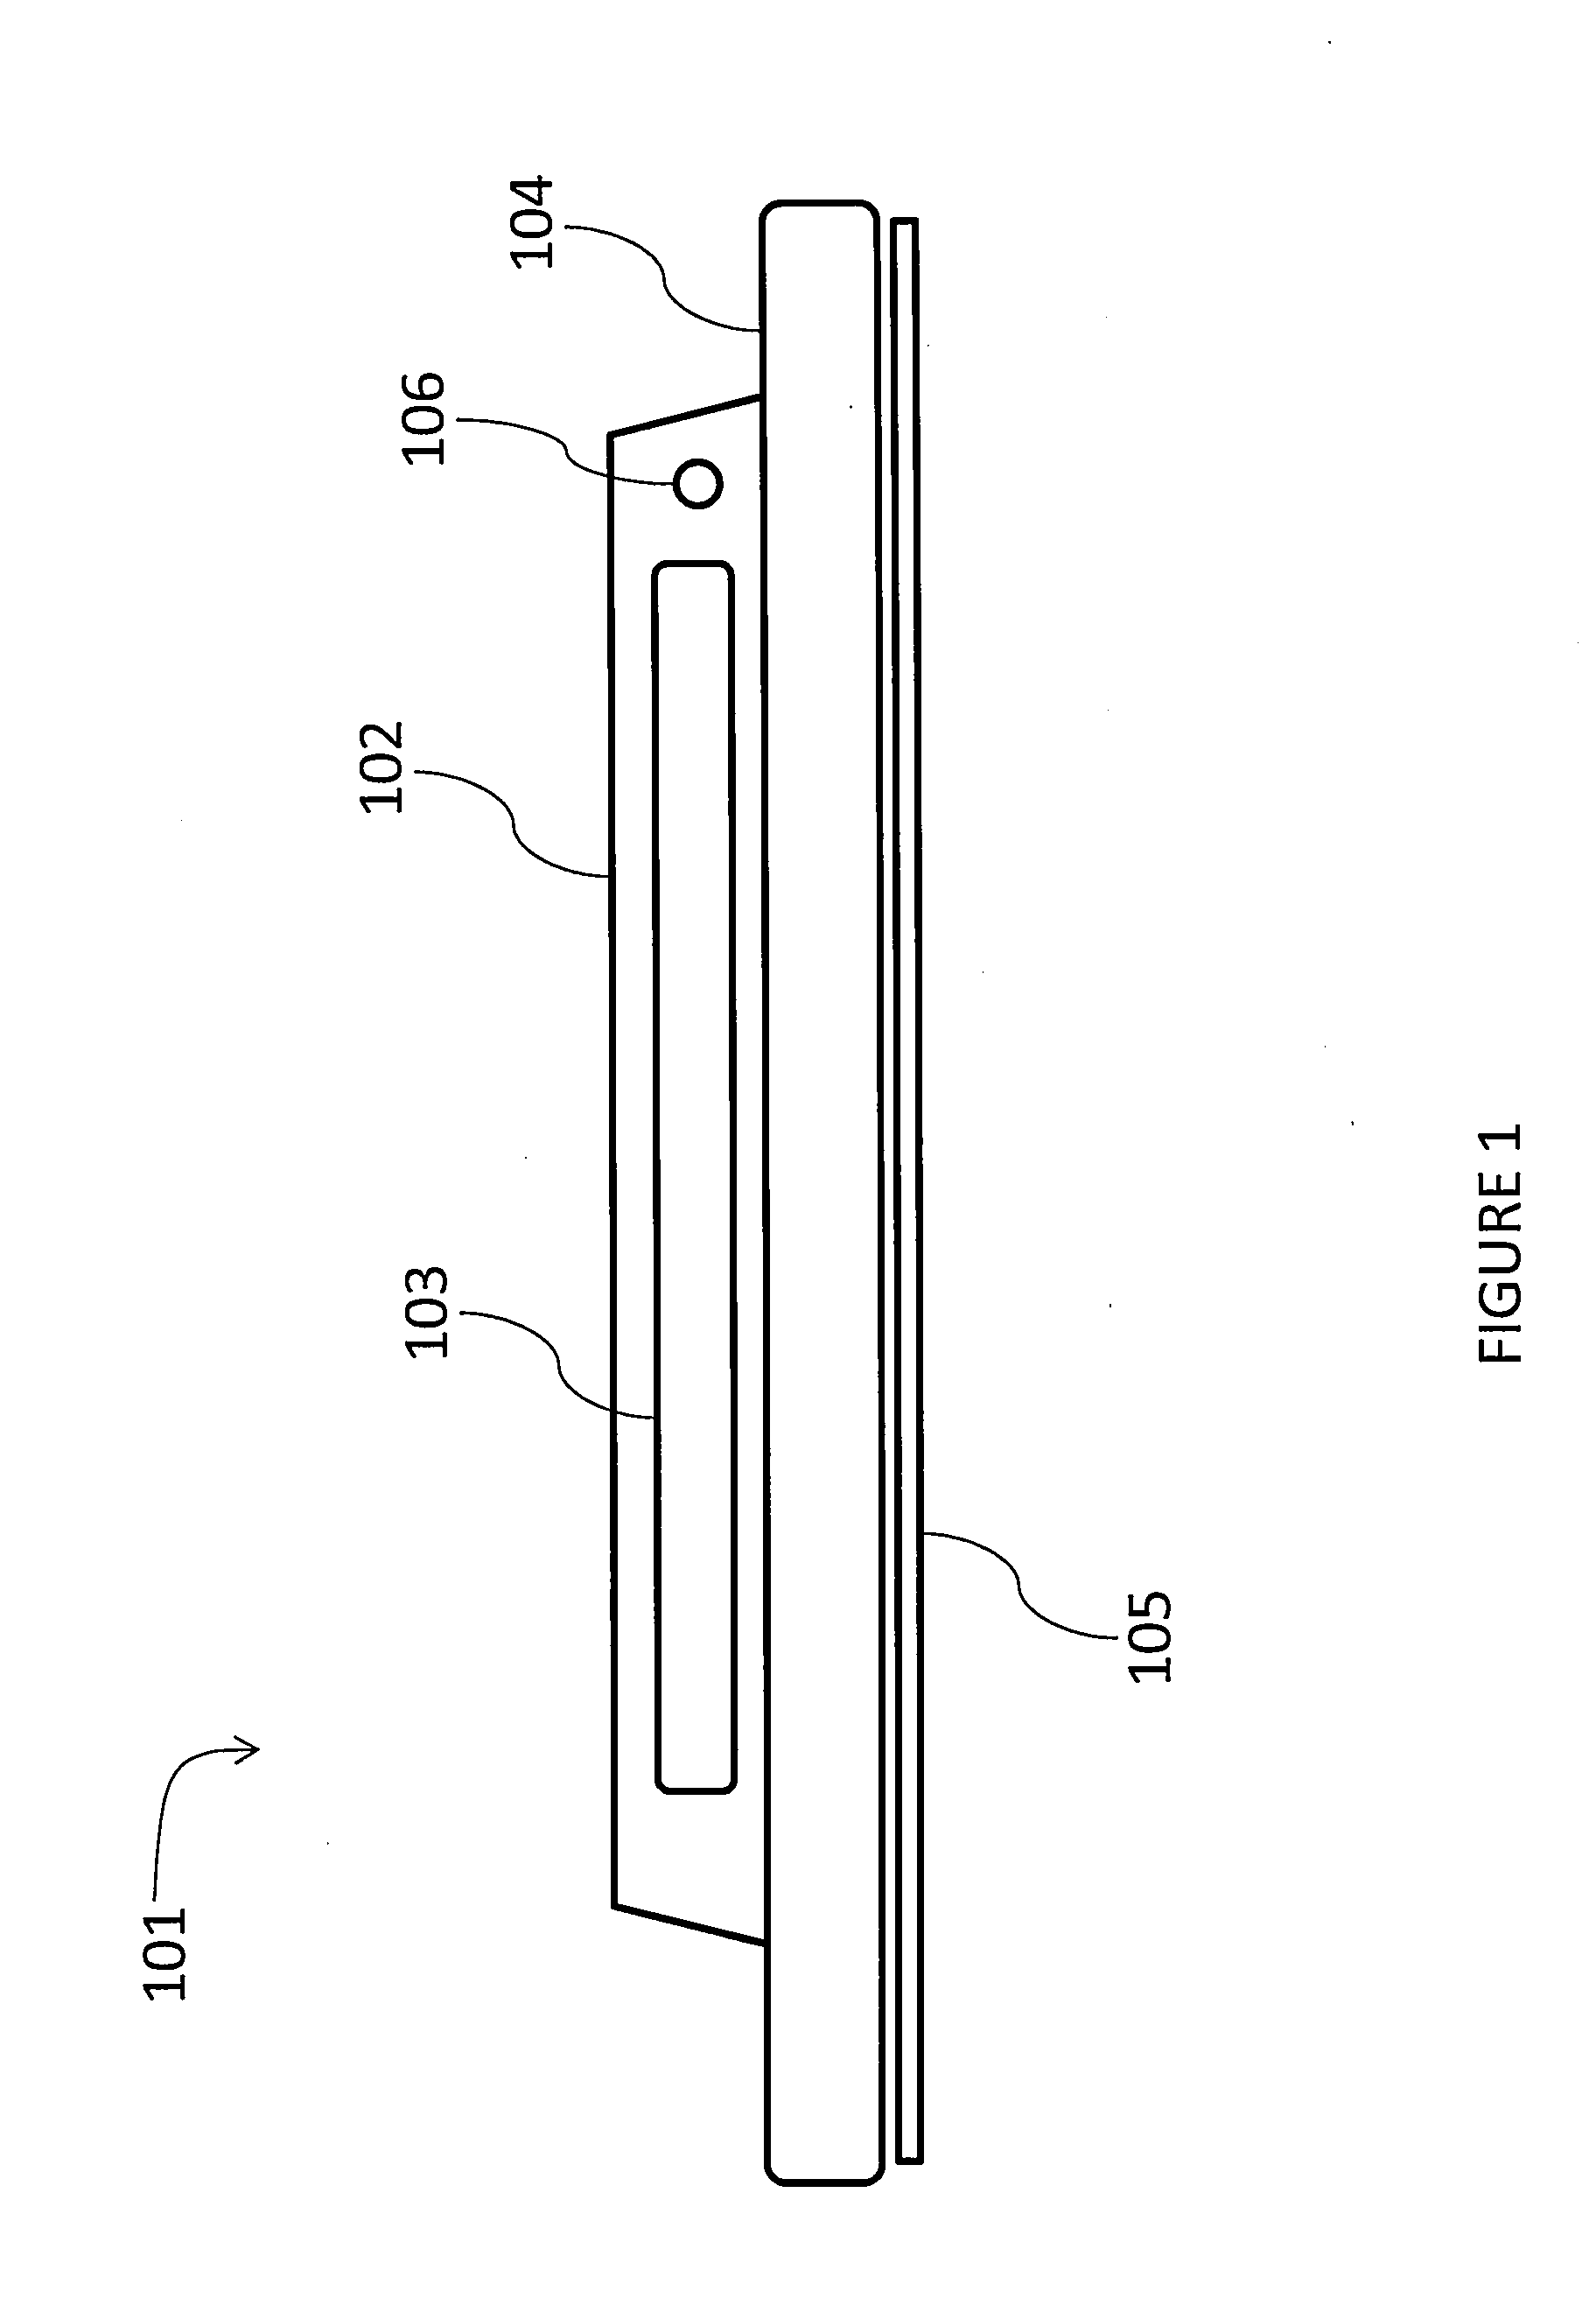 Accelerometer and wireless notification system